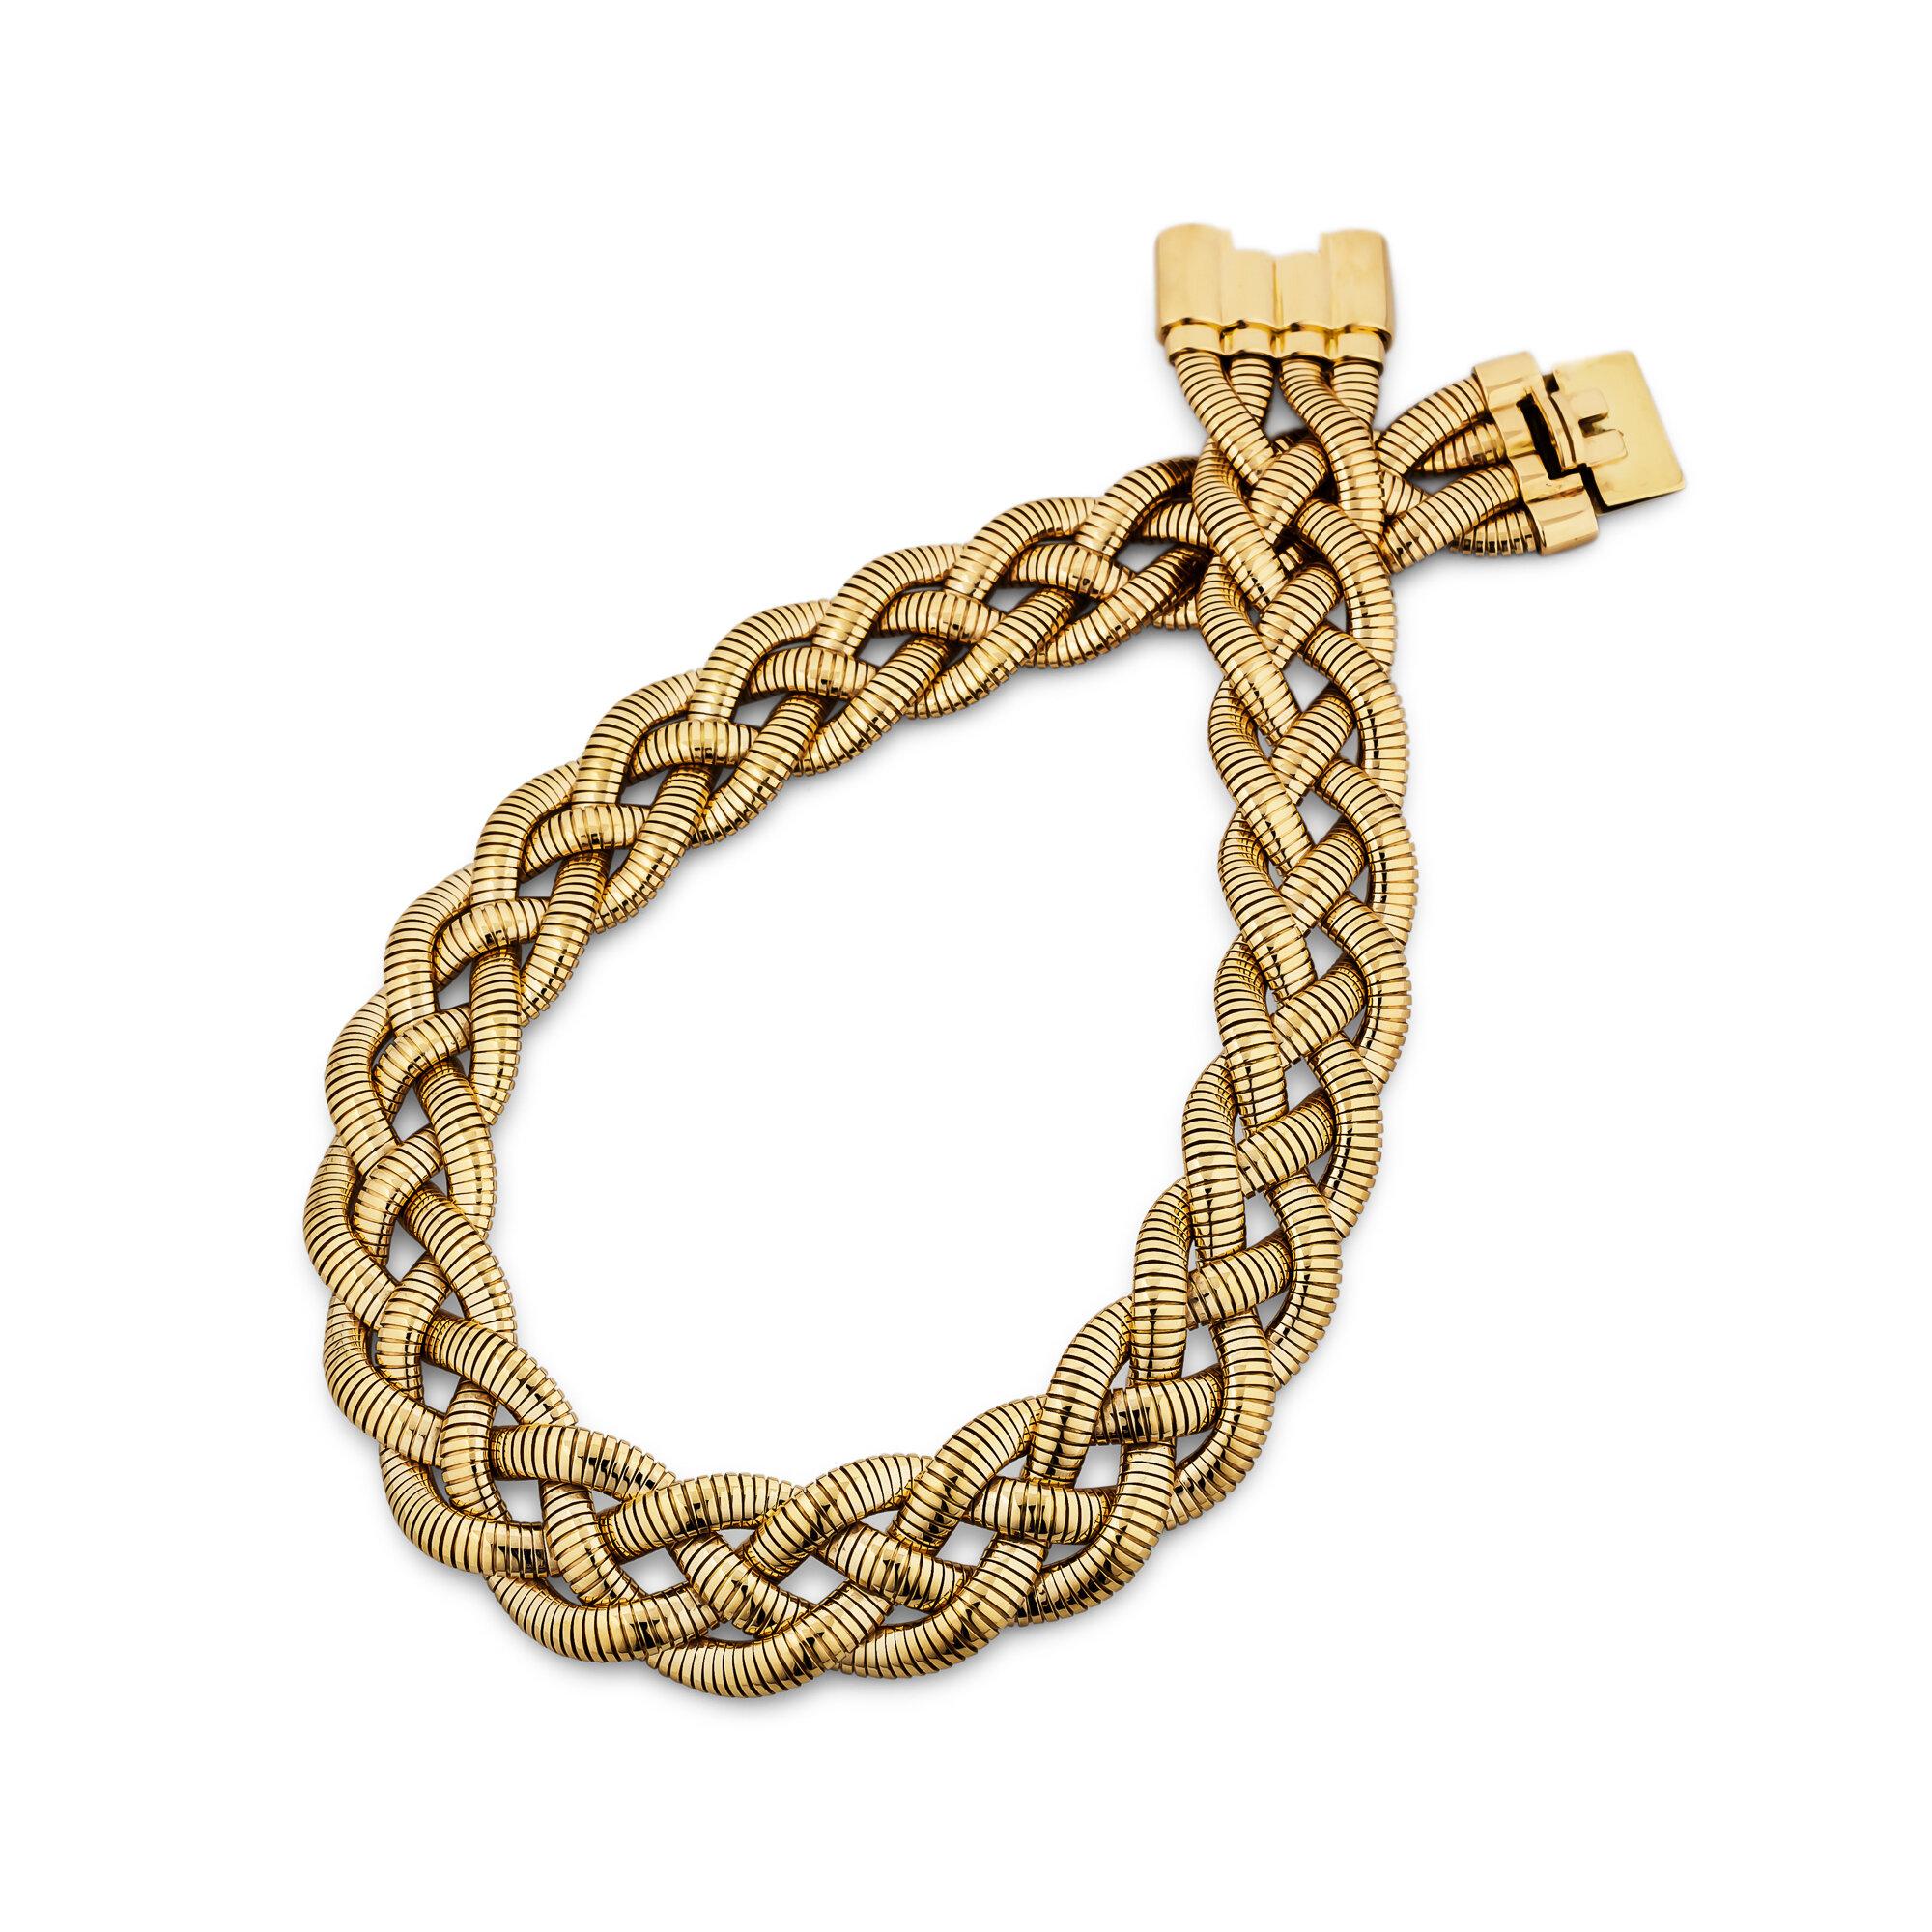 A Tiffany & Co. vintage 14 karat yellow gold braided tubogas necklace will add the perfect amount of visual texture, modern style, and richness to everyday wear.  Flexible and comfortable to wear.  Signed Tiffany & Co.  Circa 1980's.  16